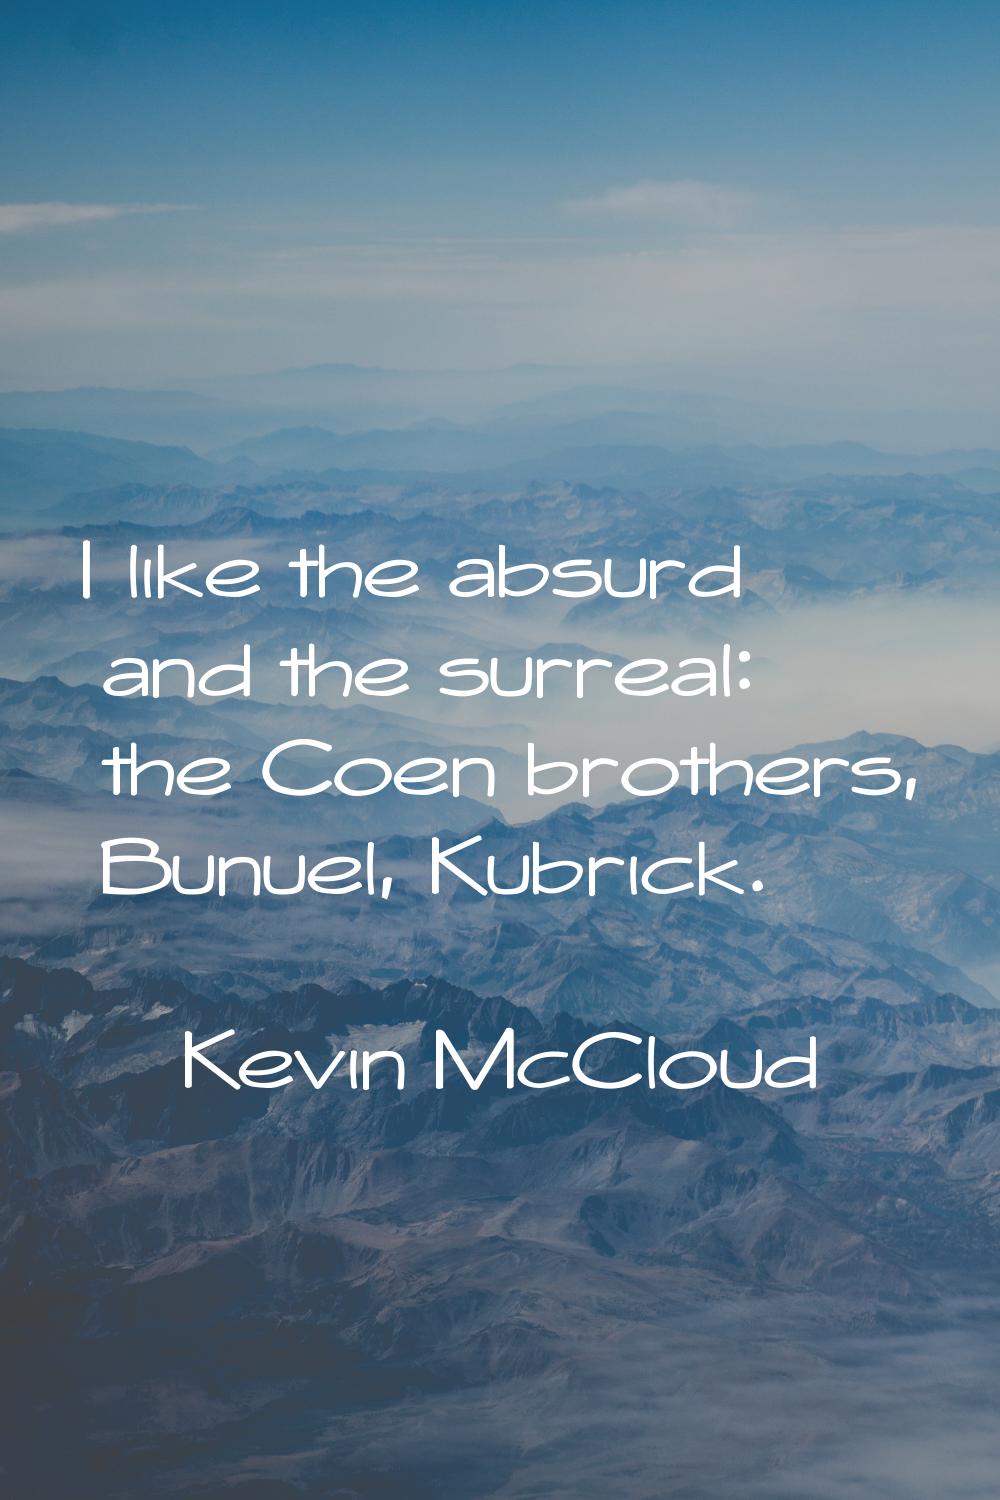 I like the absurd and the surreal: the Coen brothers, Bunuel, Kubrick.